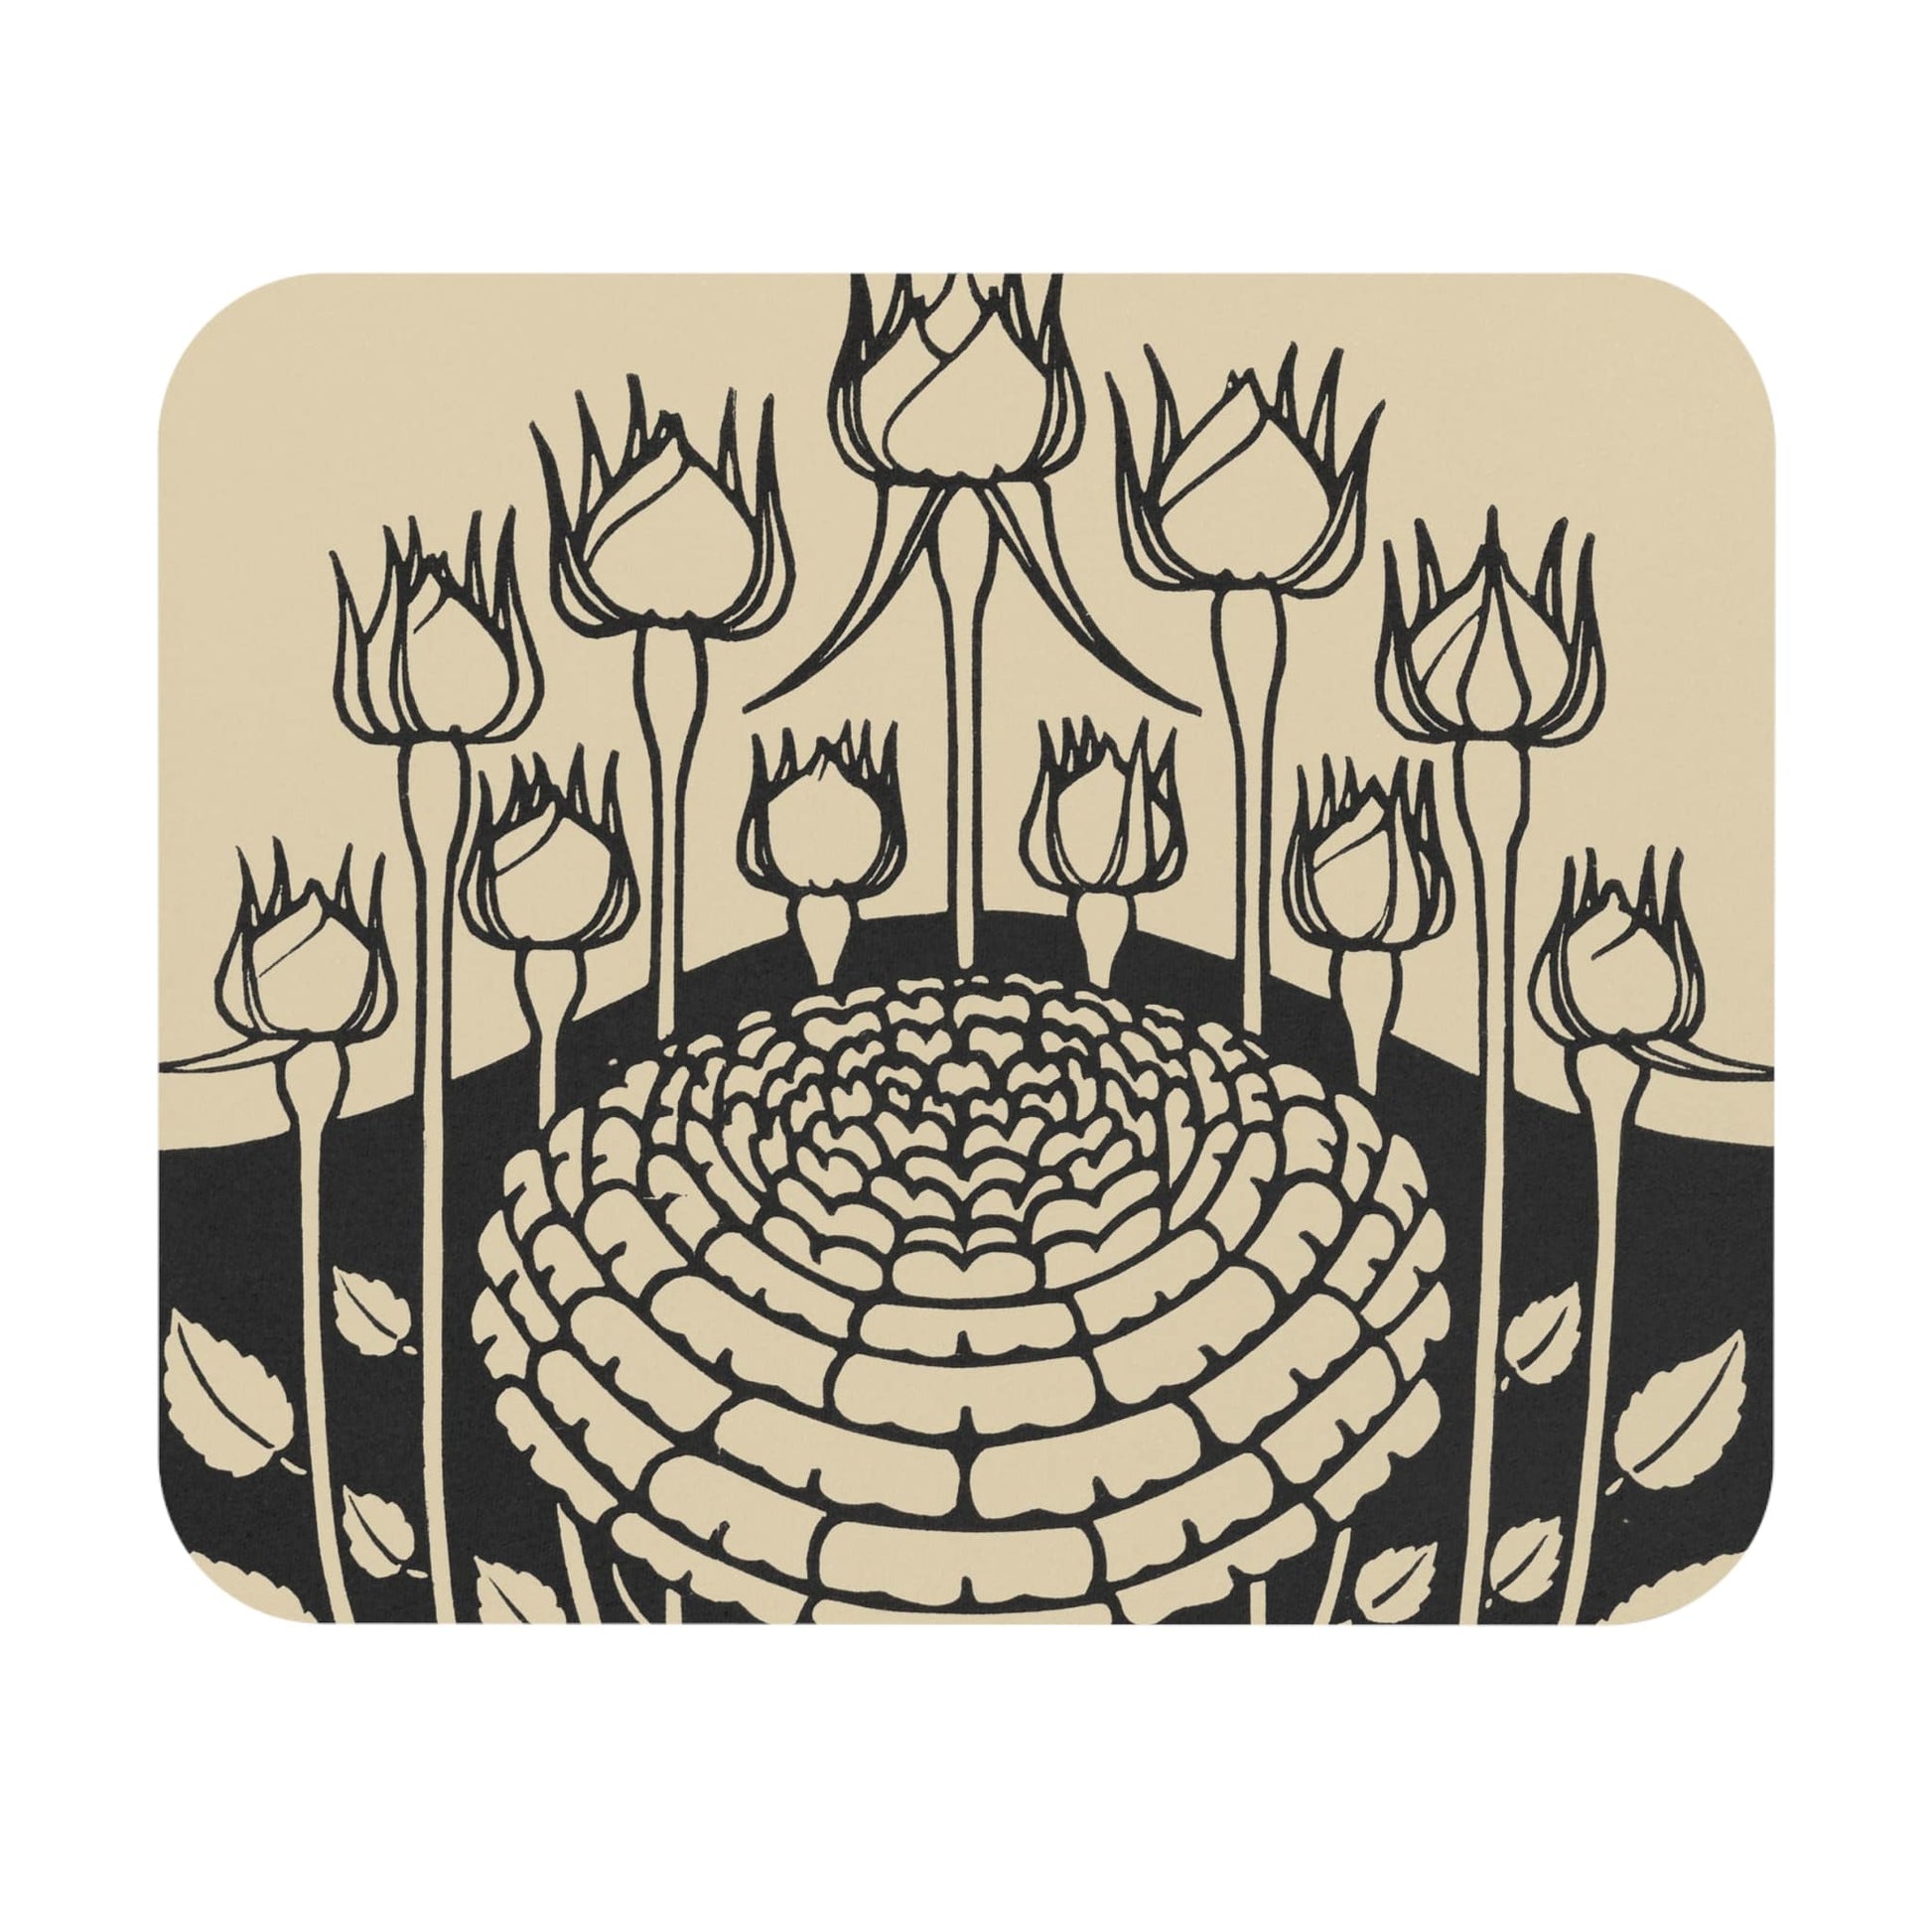 Rose Bush Mouse Pad showcasing ink drawing art, ideal for desk and office decor.